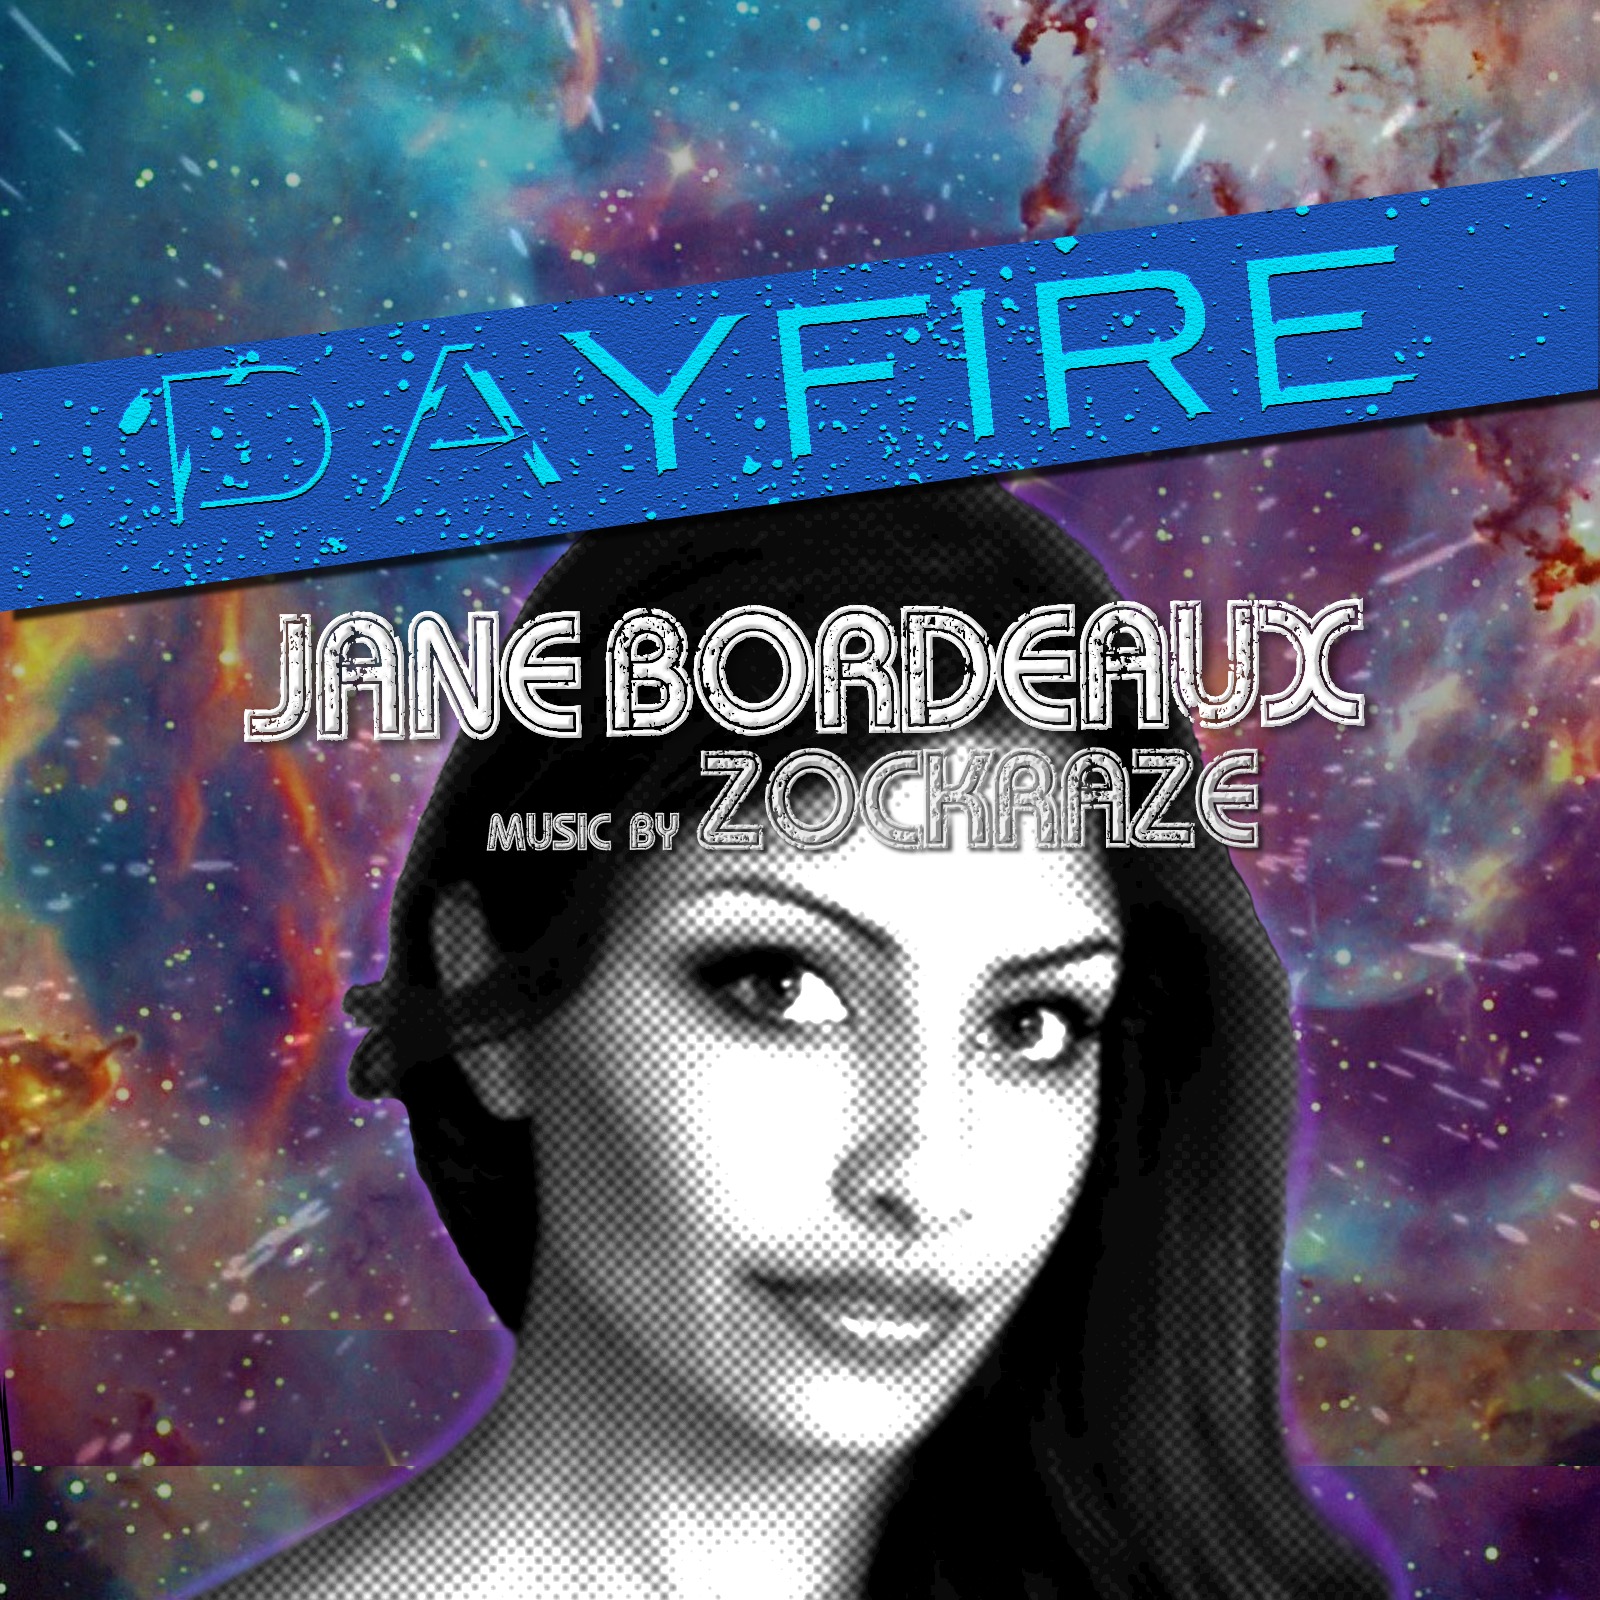 NEW MUSIC BY JANE BORDEAUX FEATURING MUSIC BY ZockRaZe